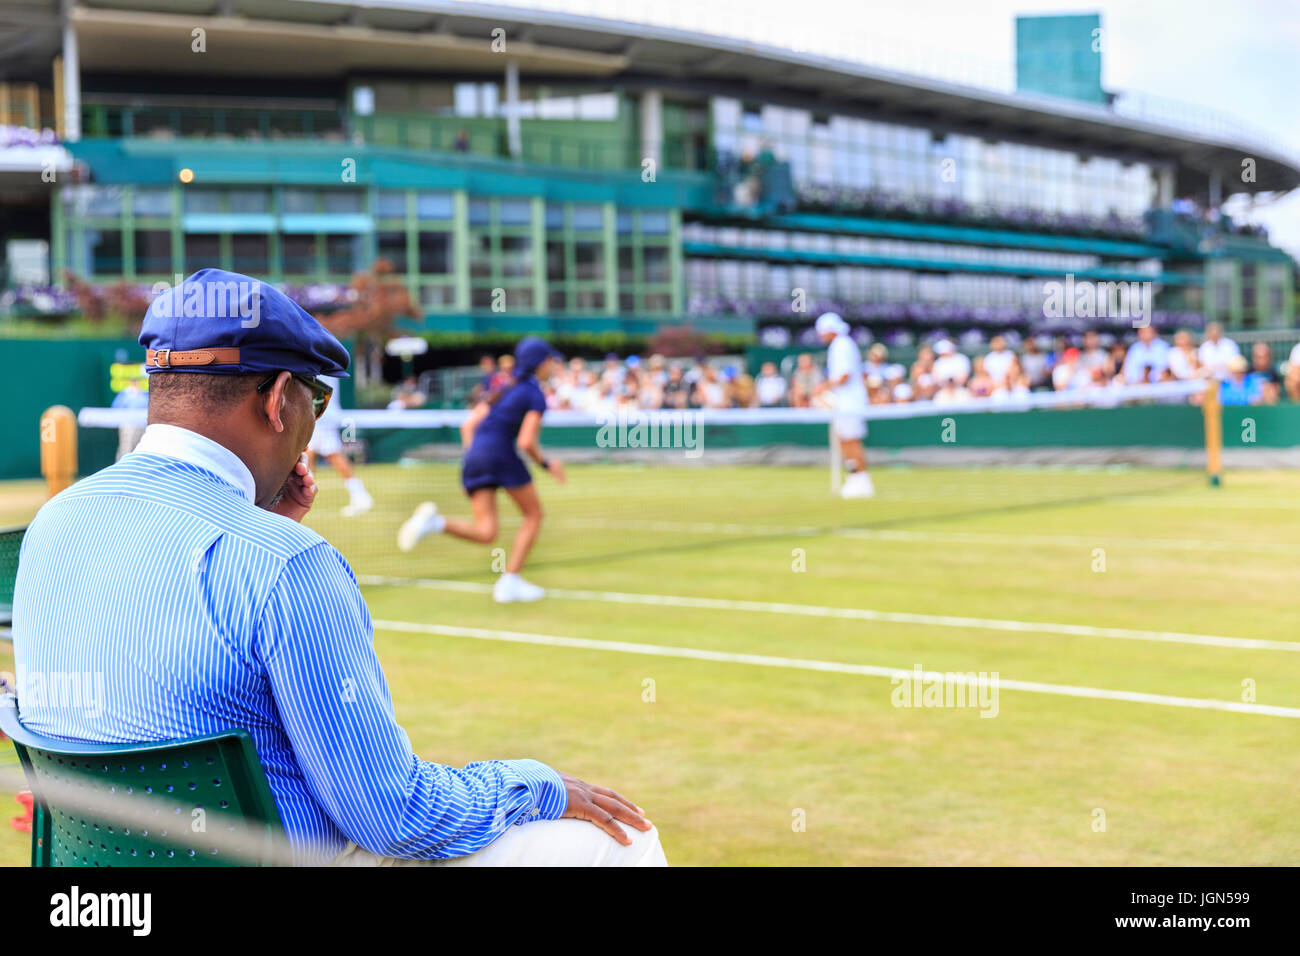 A Wimbledon line judge, or line umpire watches the game at the Wimbledon Tennis Championships 2017, All England Lawn Tennis and Croquet Club, London Stock Photo